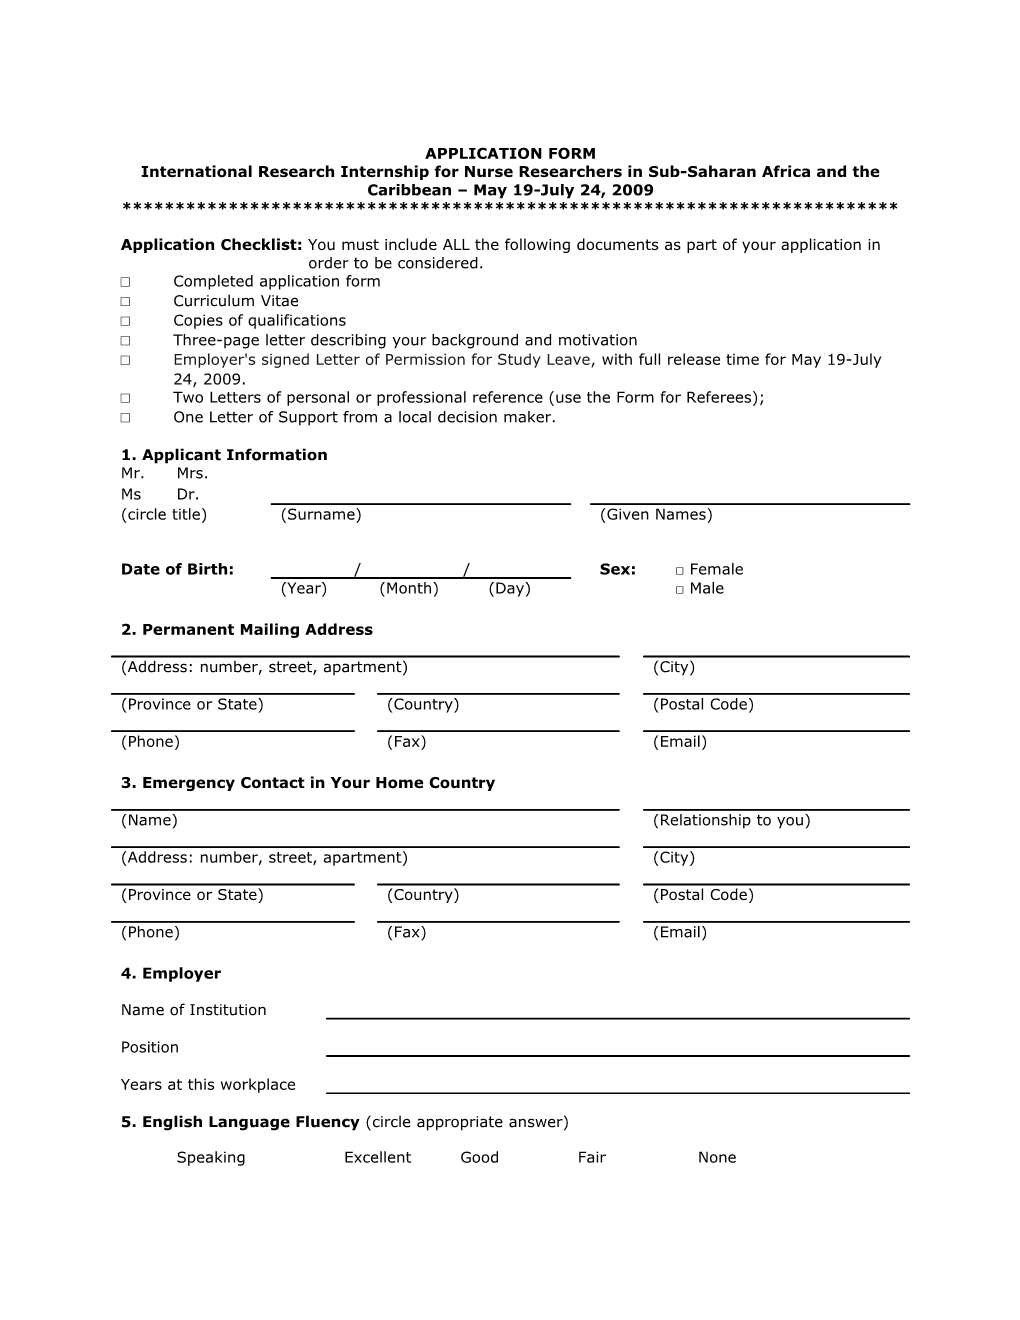 Application Form for Research Internship